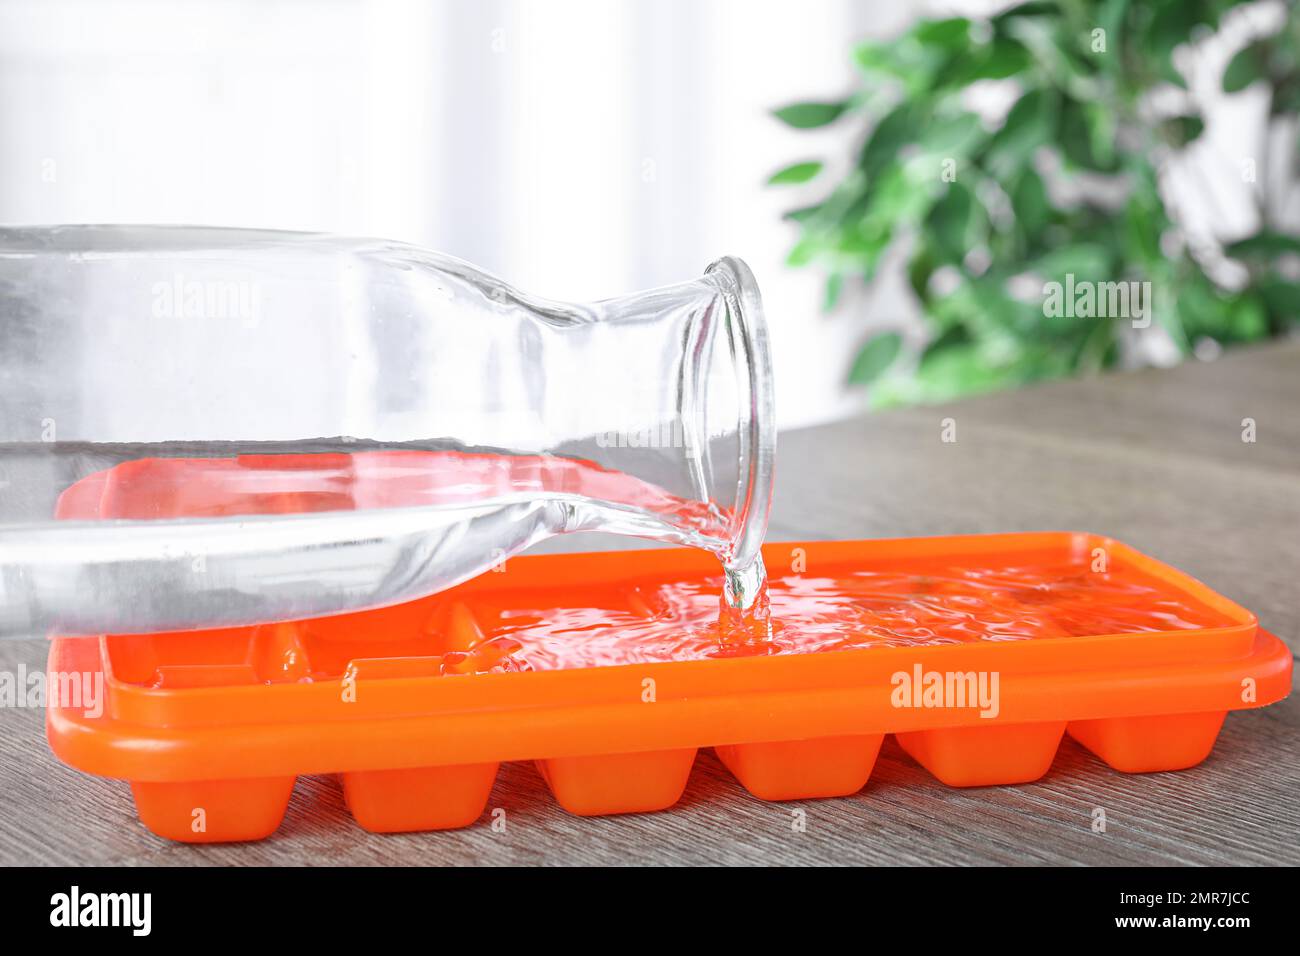 https://c8.alamy.com/comp/2MR7JCC/pouring-water-into-ice-cube-tray-on-wooden-table-closeup-2MR7JCC.jpg